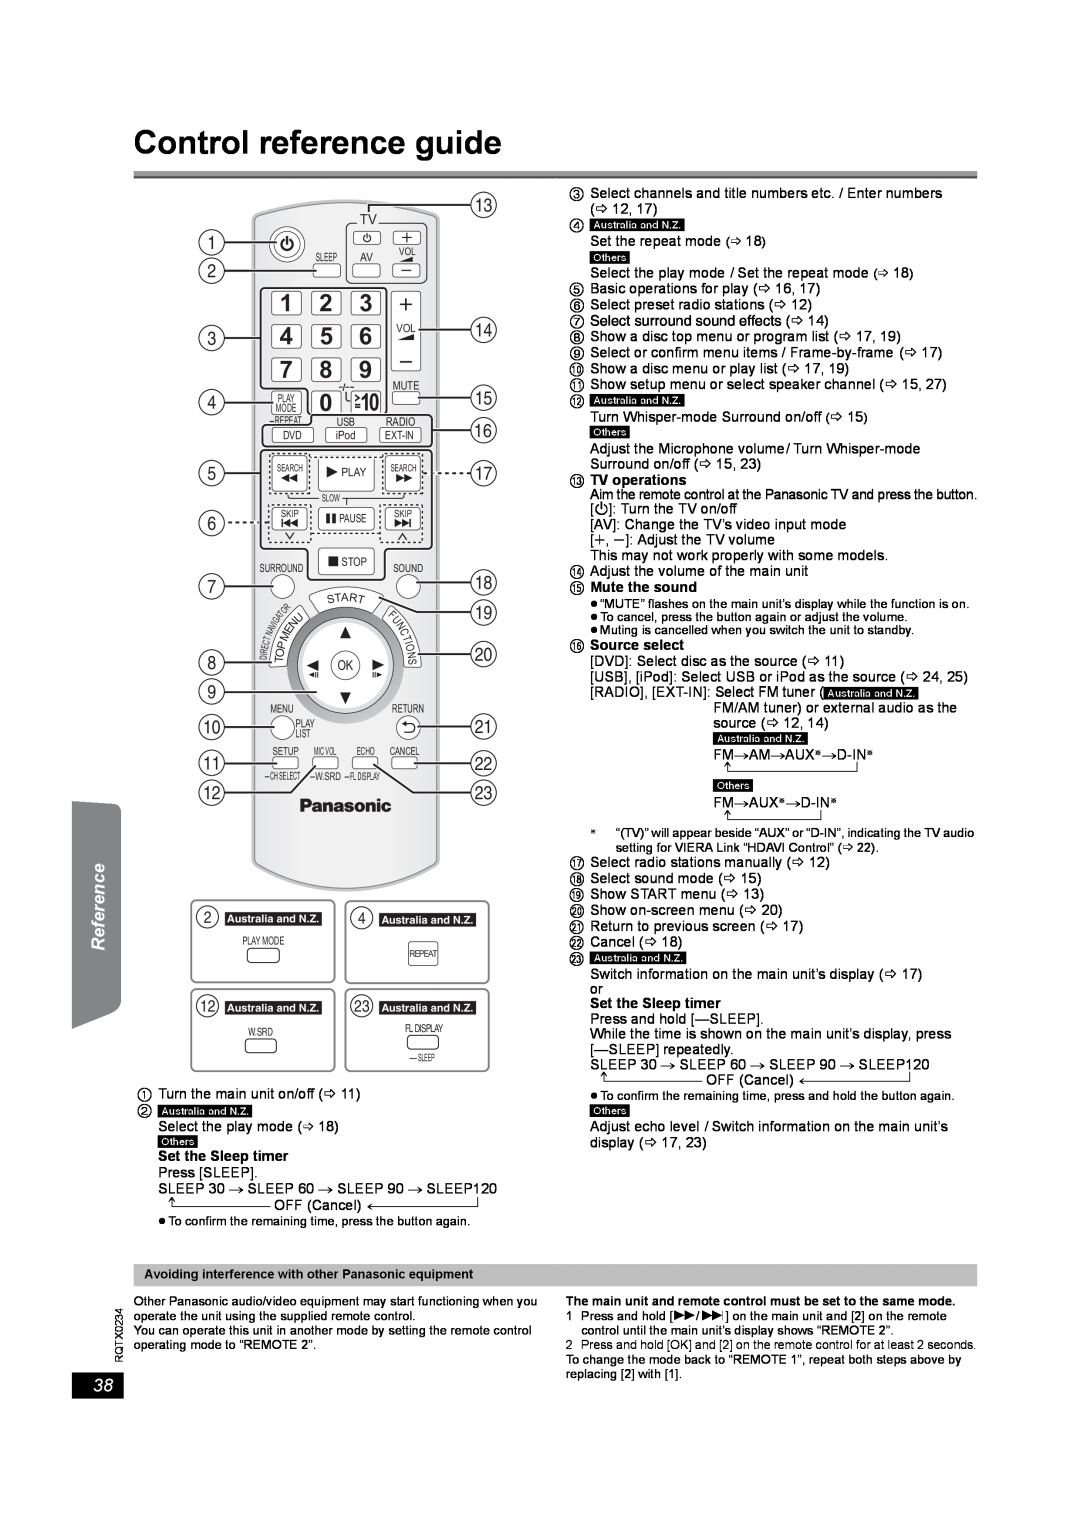 Panasonic SC-PT875 operating instructions Control reference guide, 1 2 3, Getting Started Playing Discs Other Operations 